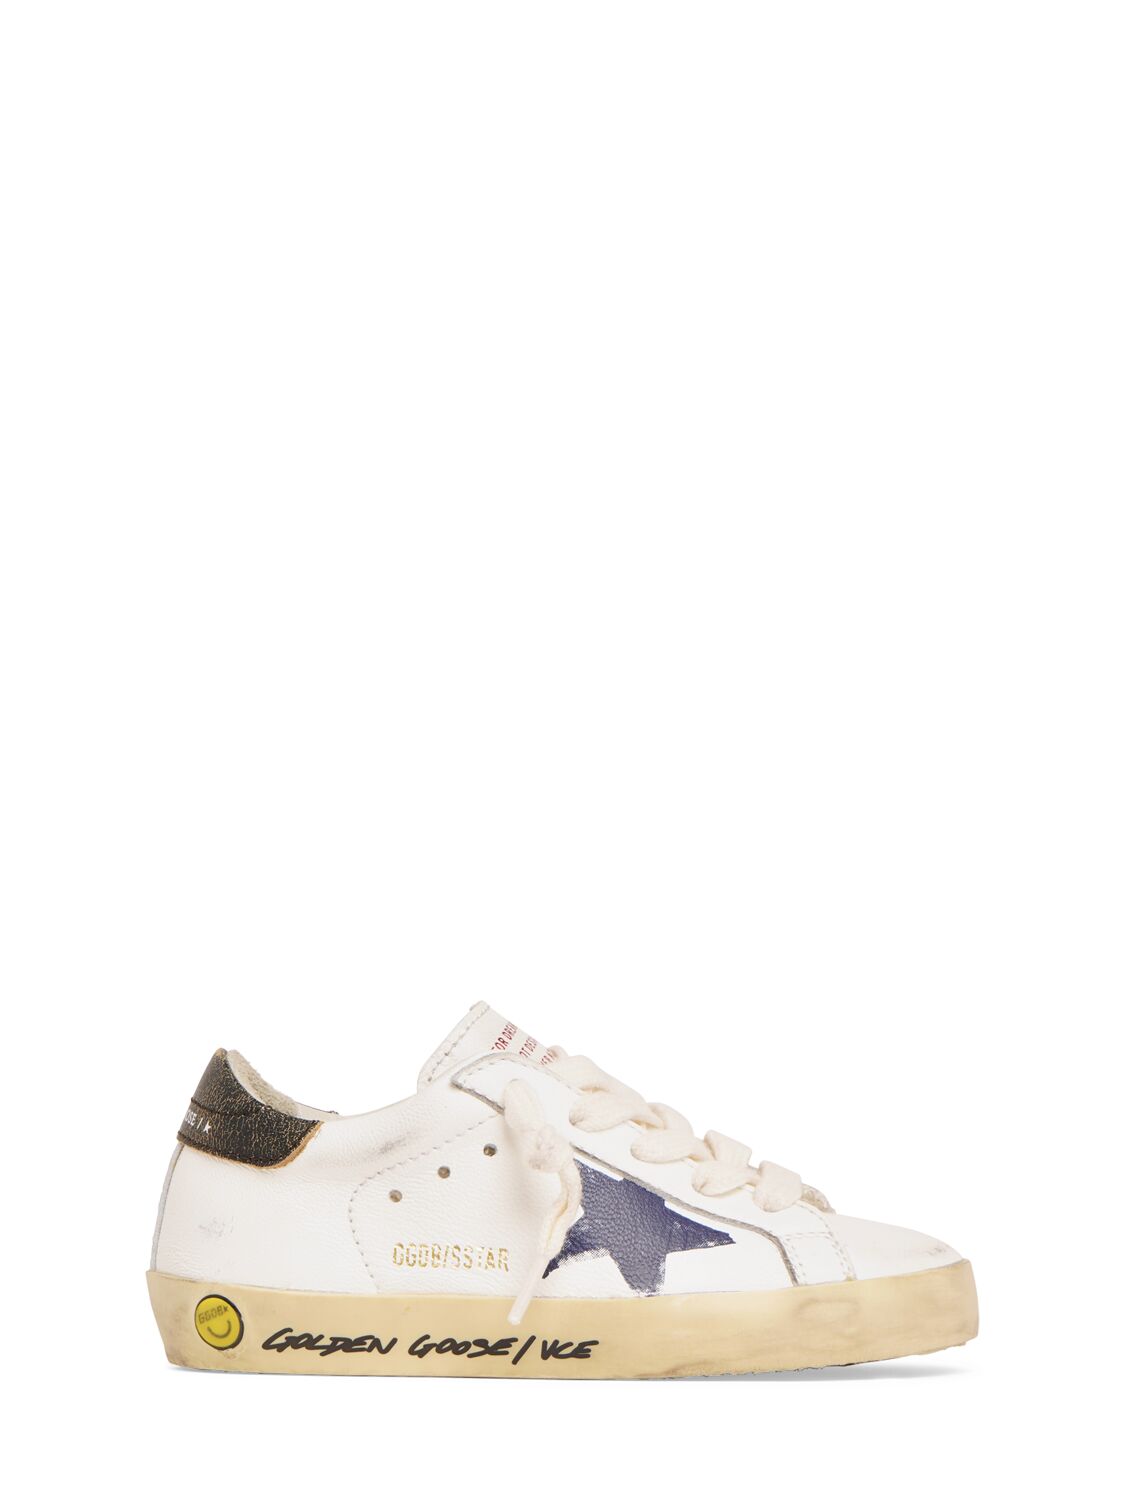 Golden Goose Kids' Super-star Leather Lace-up Sneakers In White,navy Blue